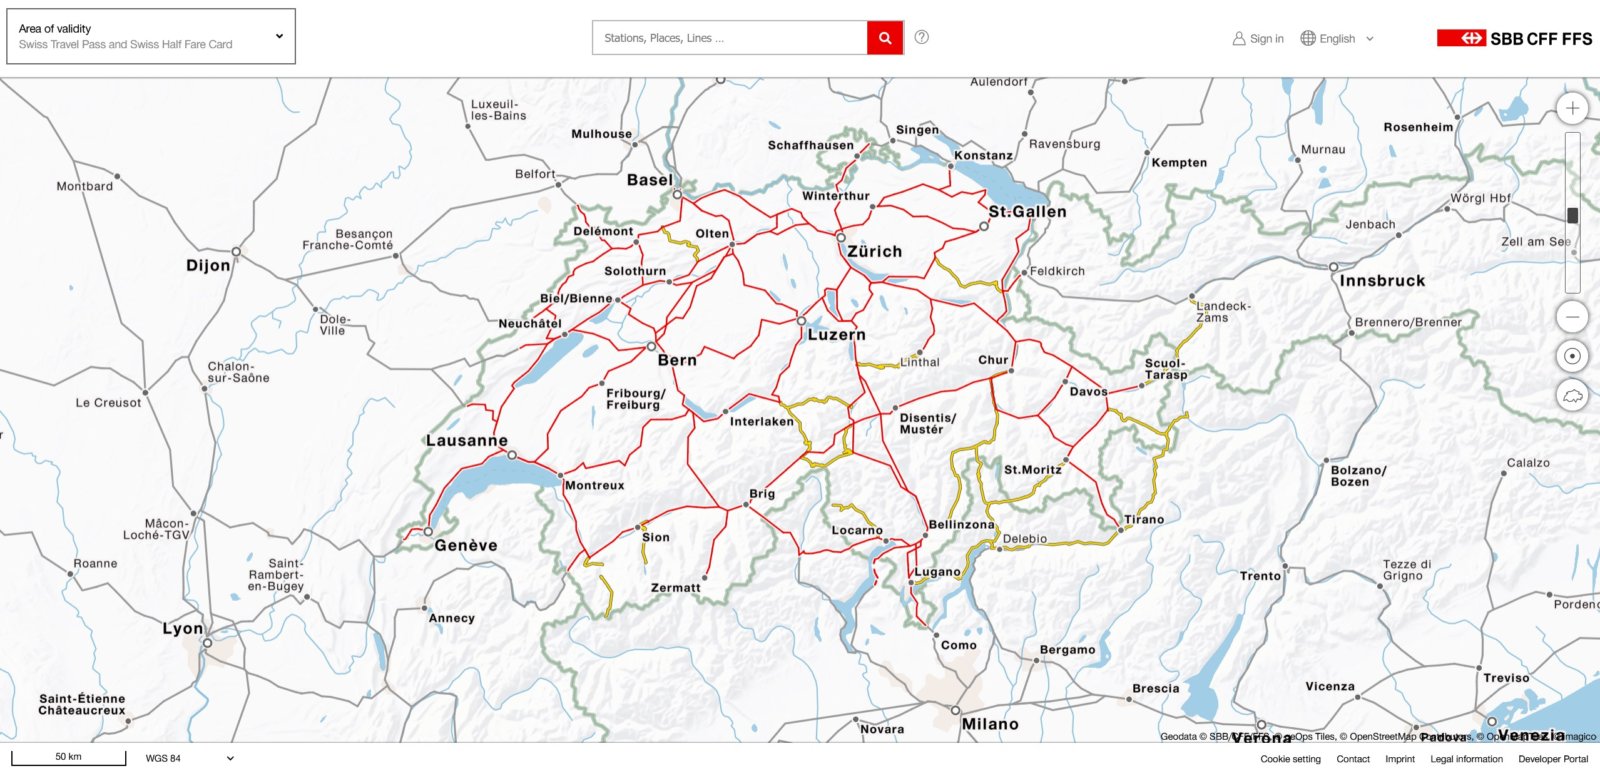 Switzerland Train Map Swiss Travel Guide Area Of Validity Trafimage 01 1600x771 